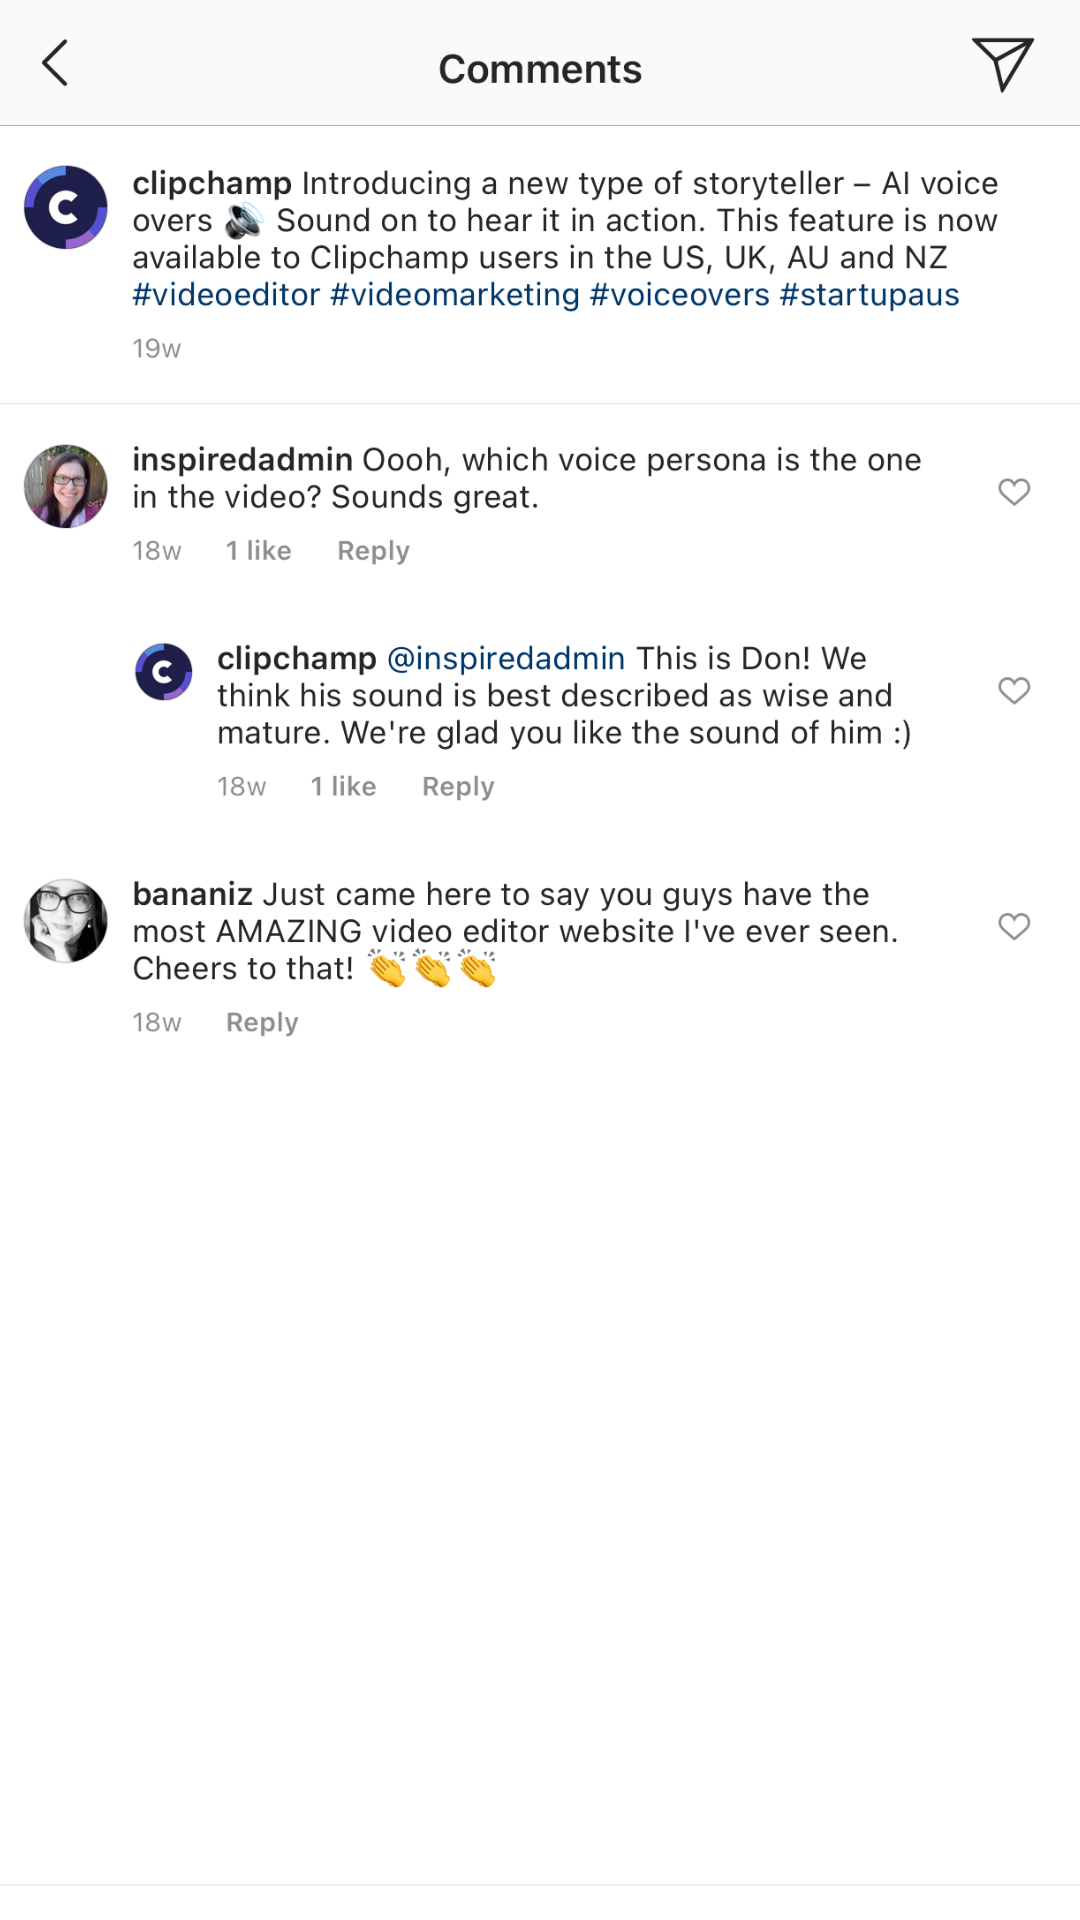 Instagram comments section - How to invite influencers to collaborate 